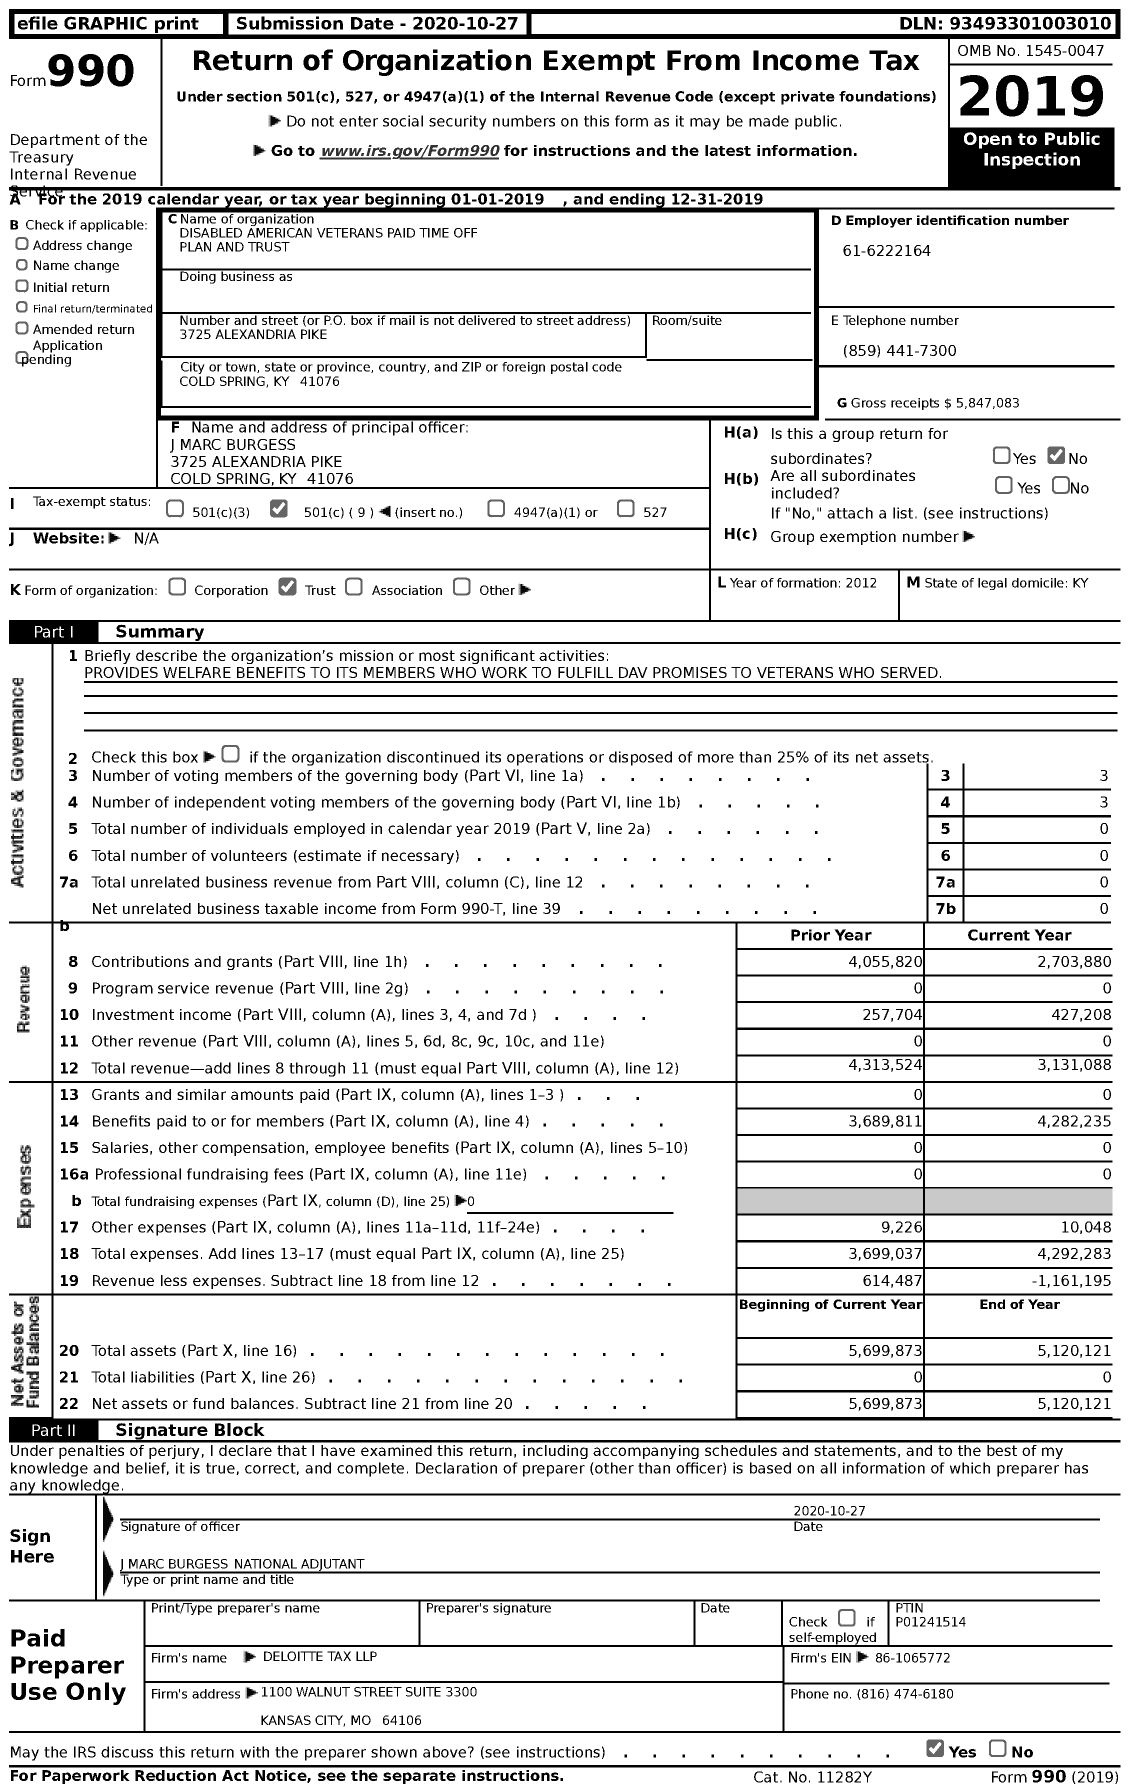 Image of first page of 2019 Form 990 for Disabled American Veterans Paid Time Off PLAN AND TRUST